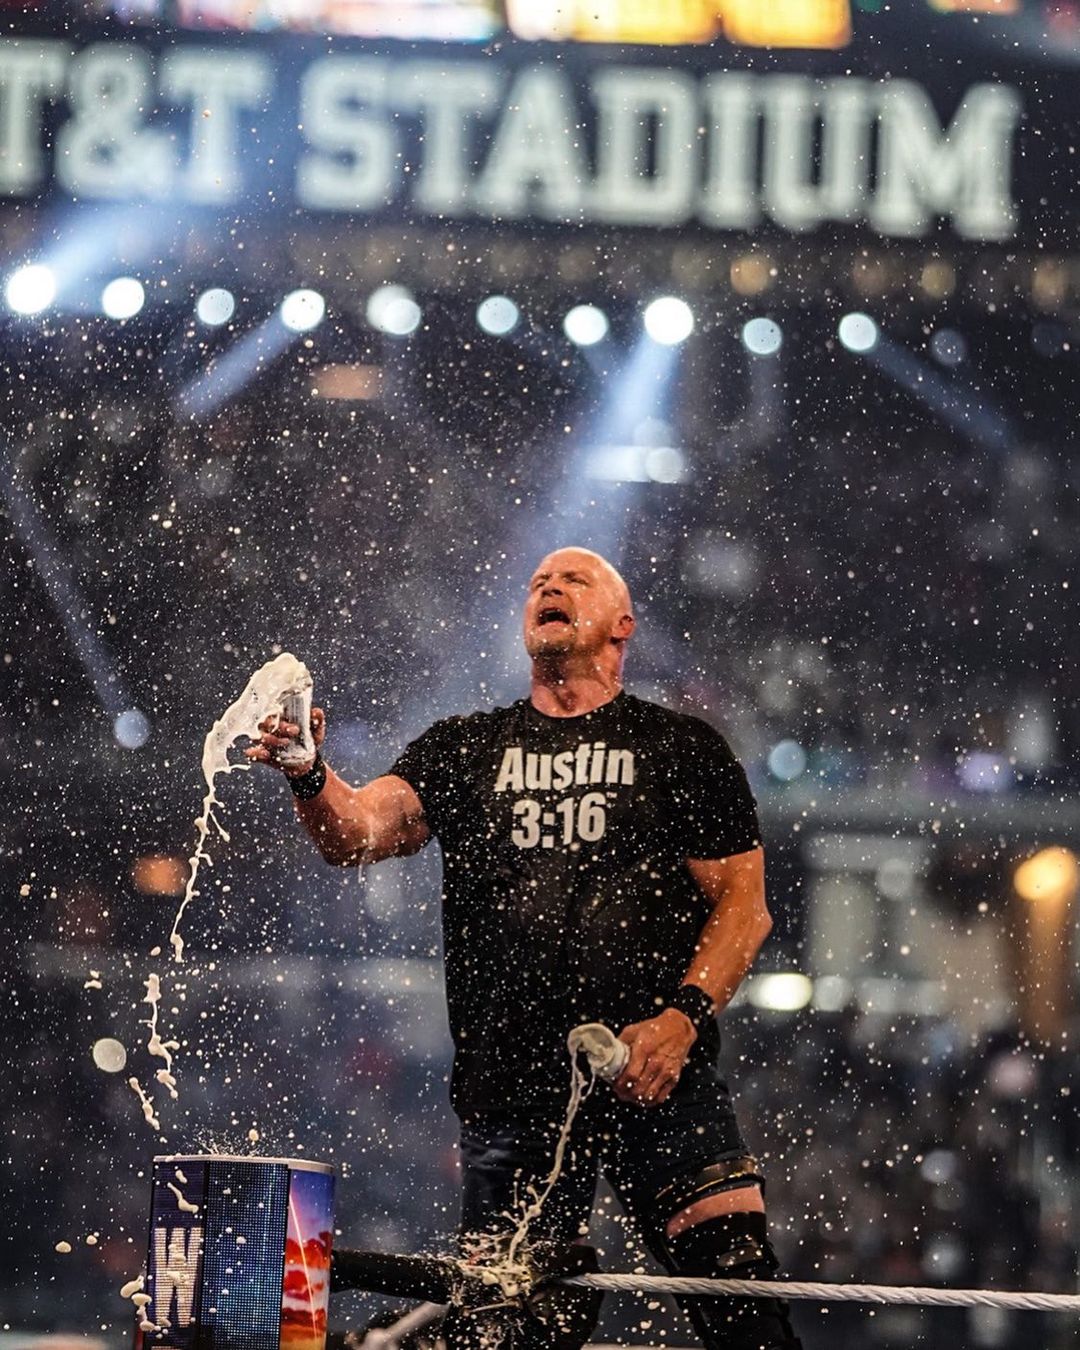 Stone Cold Steve Austin Wallpapers